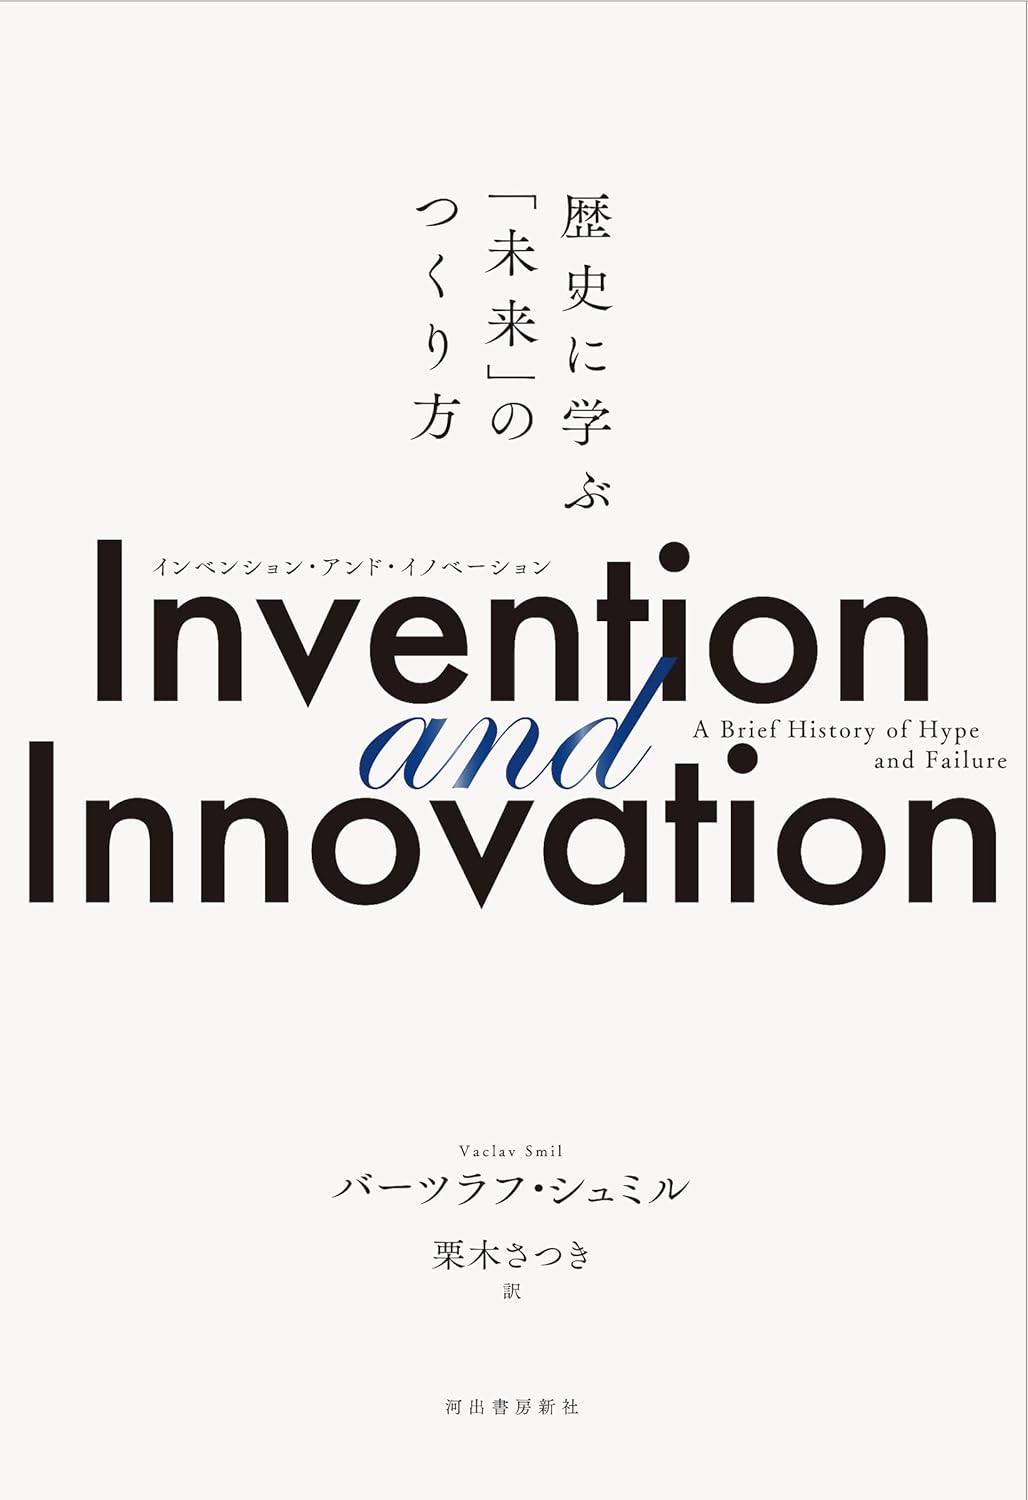 Invention and Innovation: 歷史に學ぶ「未來」のつくり方